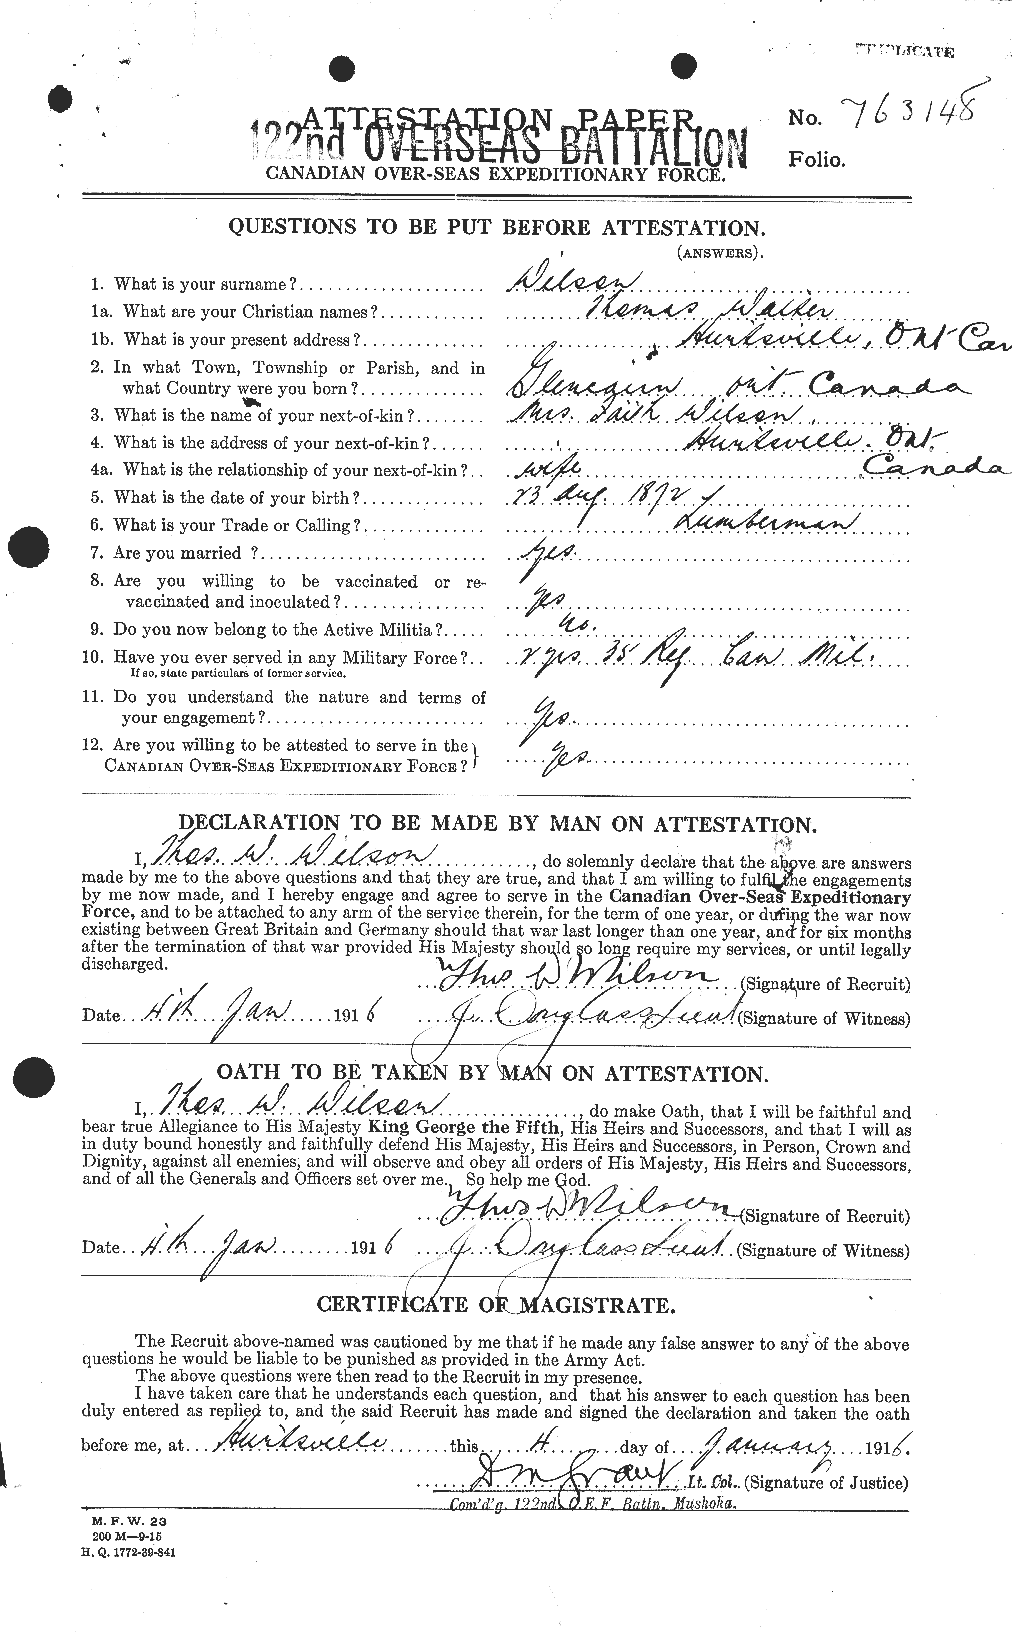 Personnel Records of the First World War - CEF 681692a